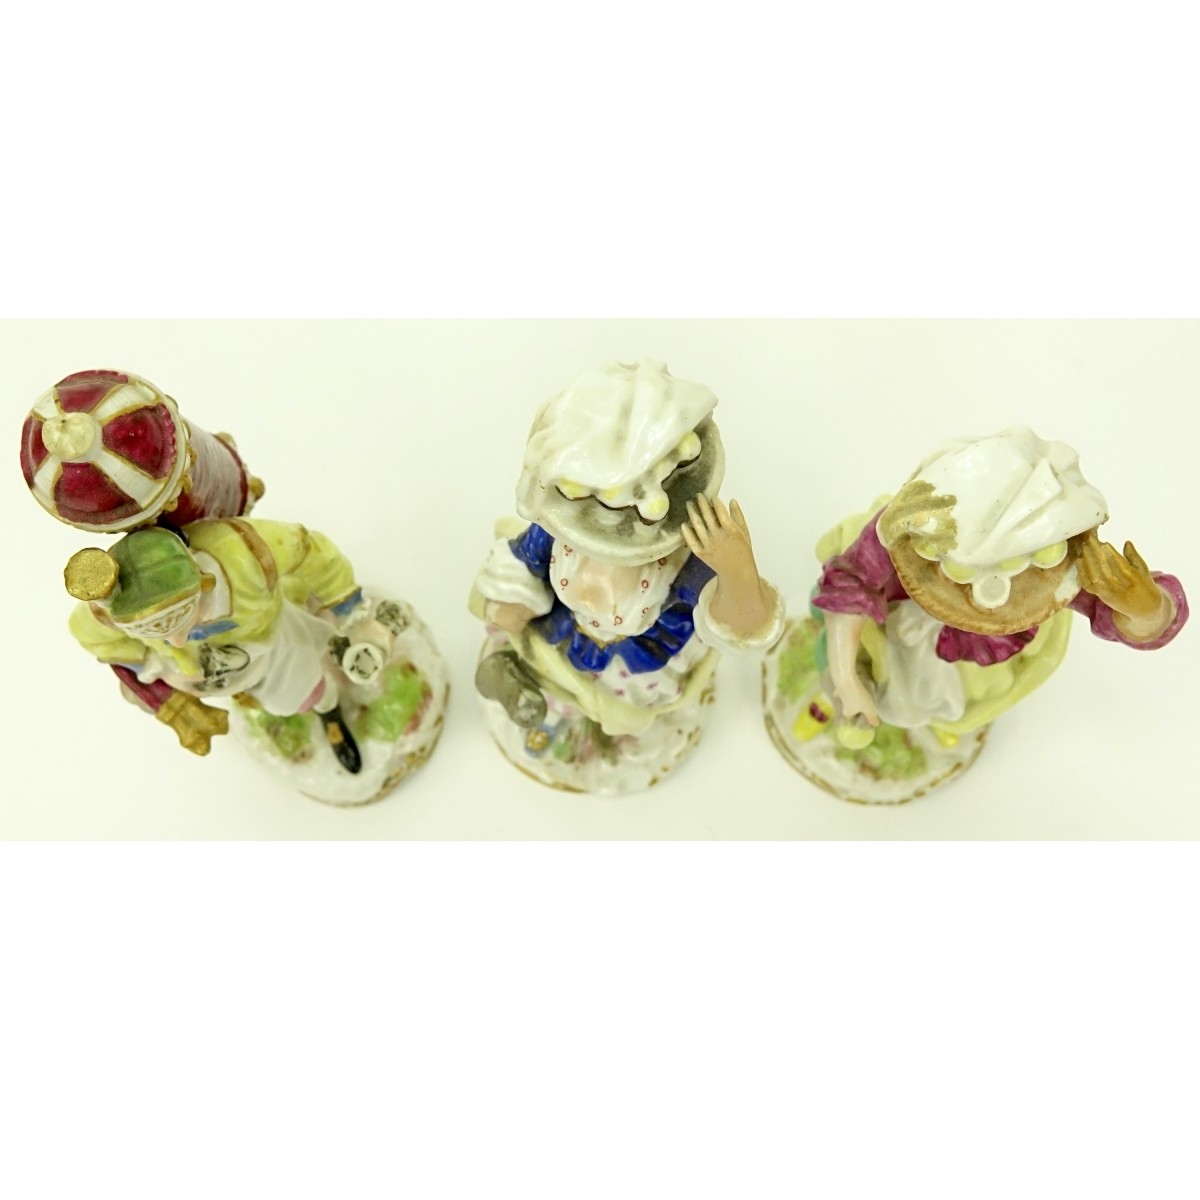 Grouping of Three (3) Antique Porcelain Figurines